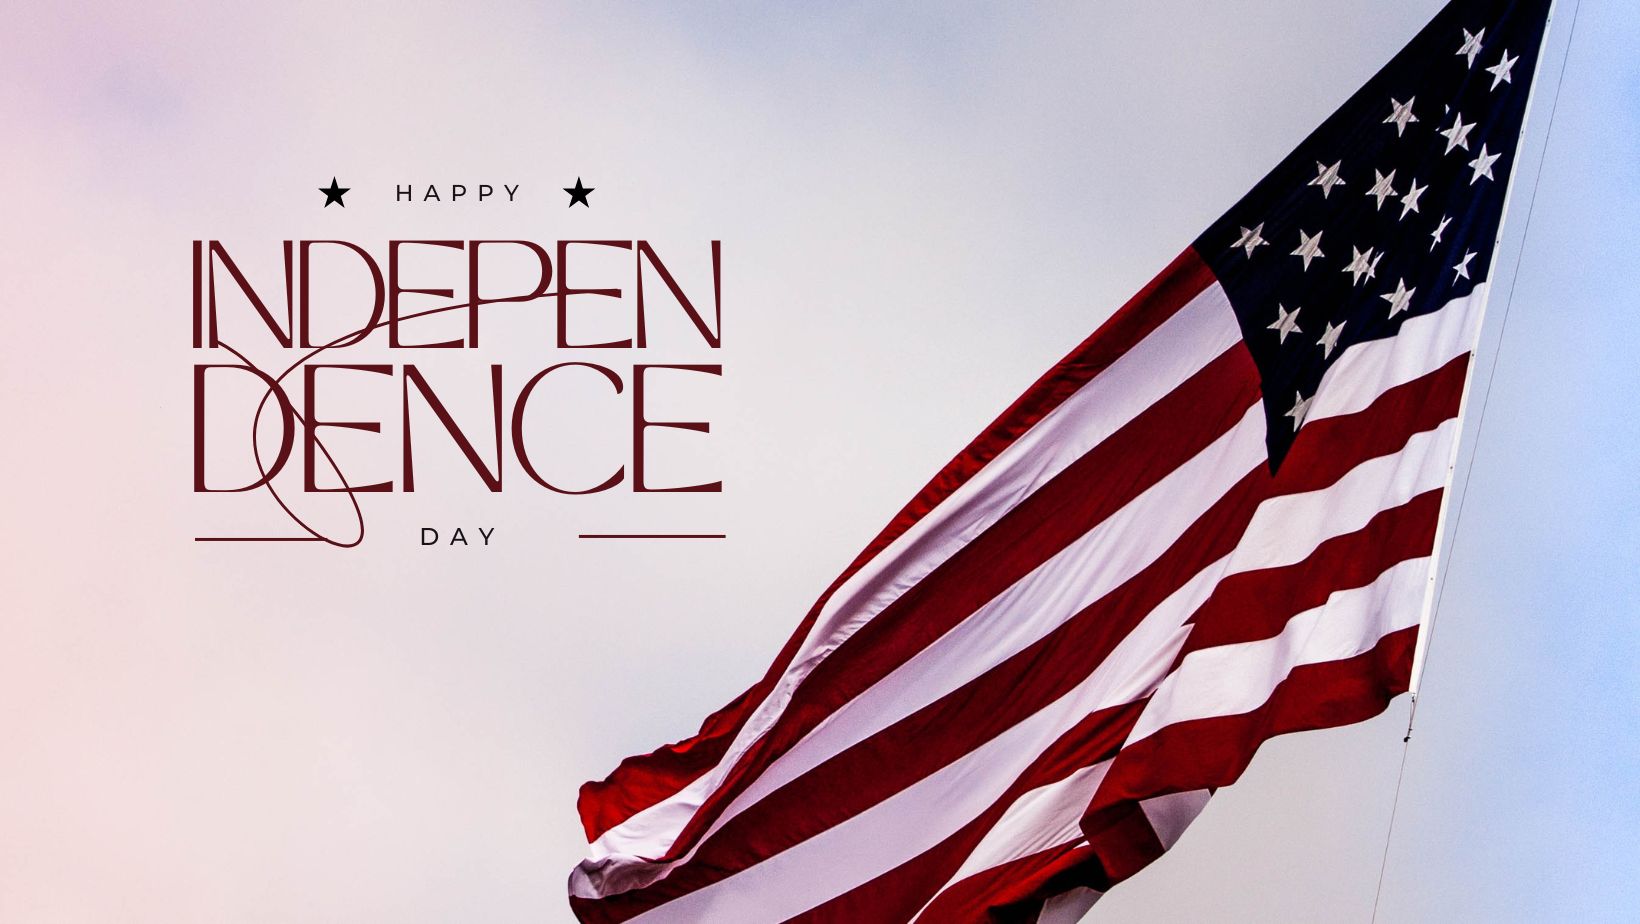 Celebrating USA Independence Day: A Reflection on Freedom and Unity